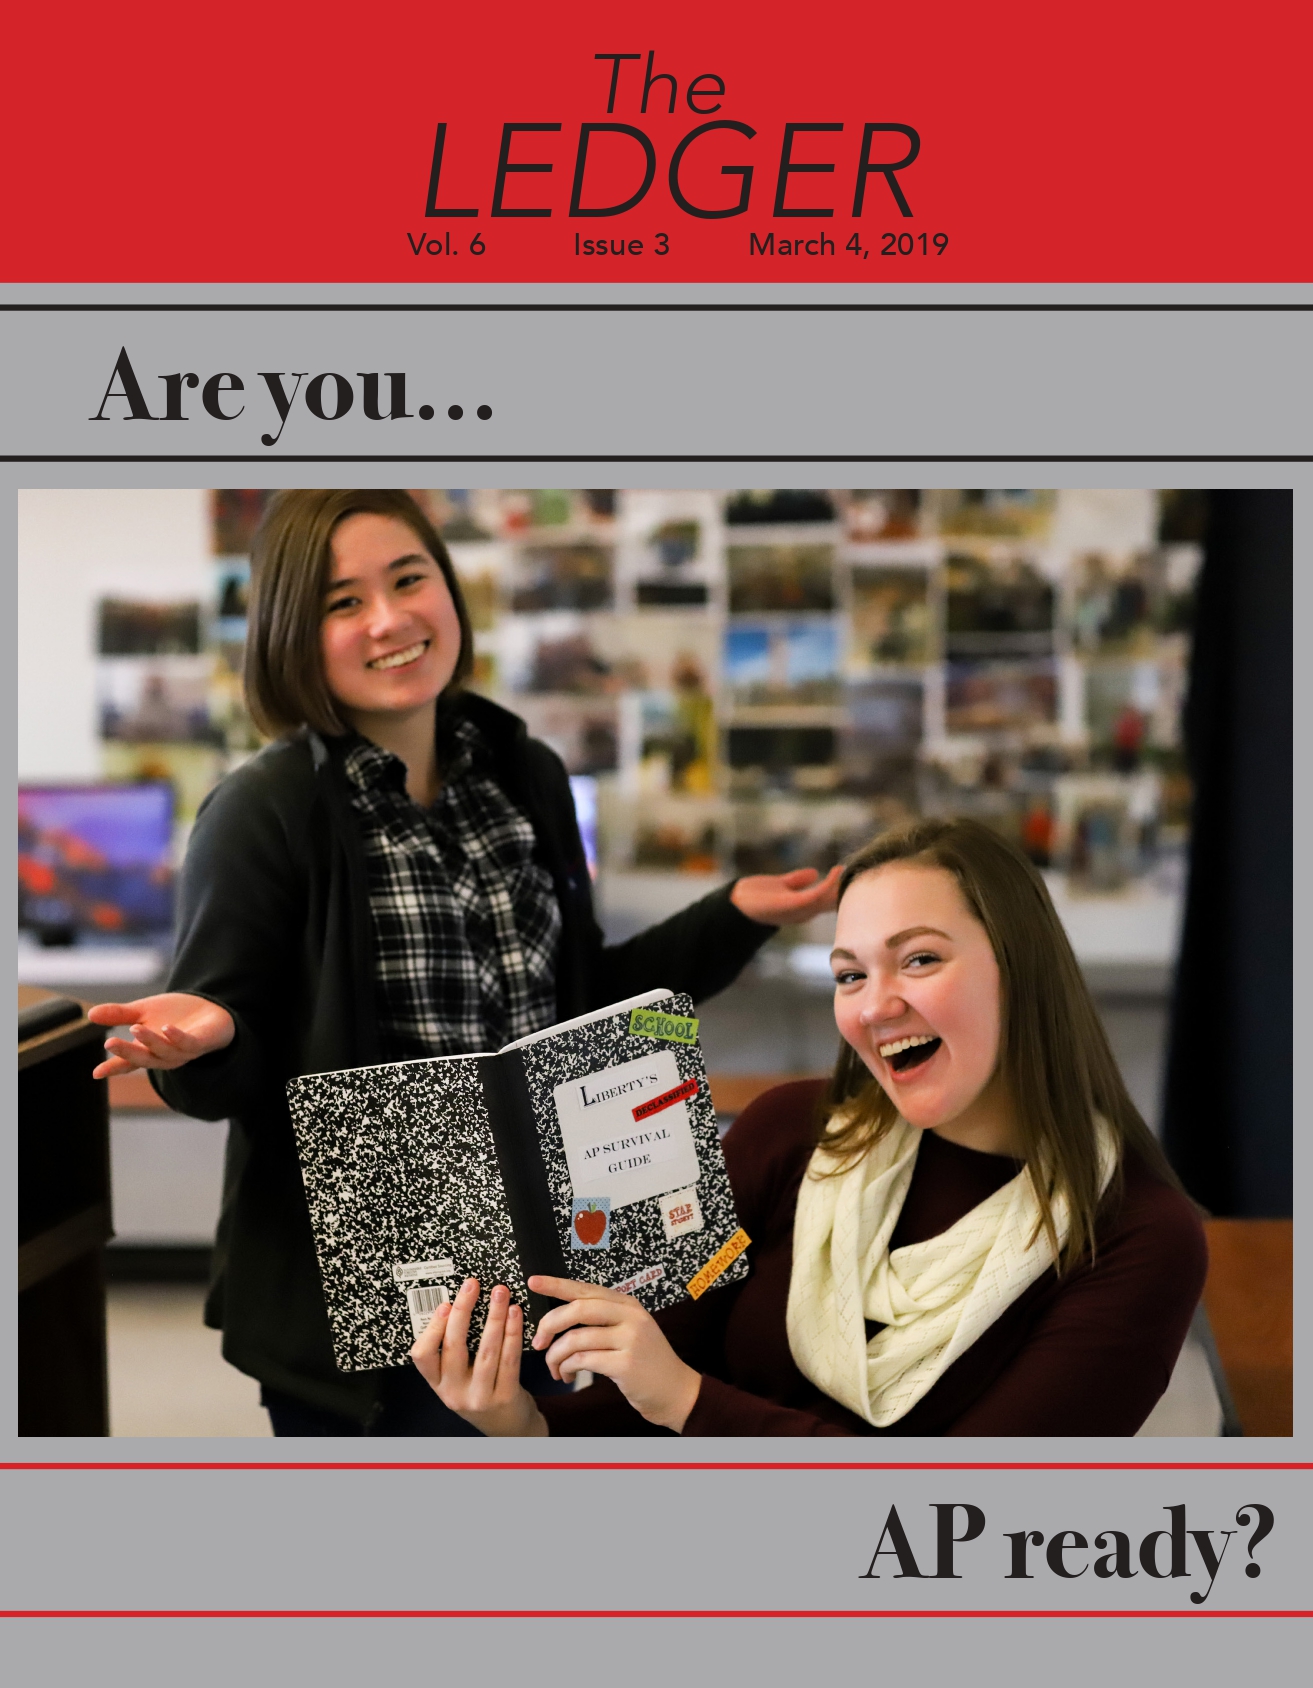 The Ledger Volume 6 Issue 3: Are You... AP Ready?